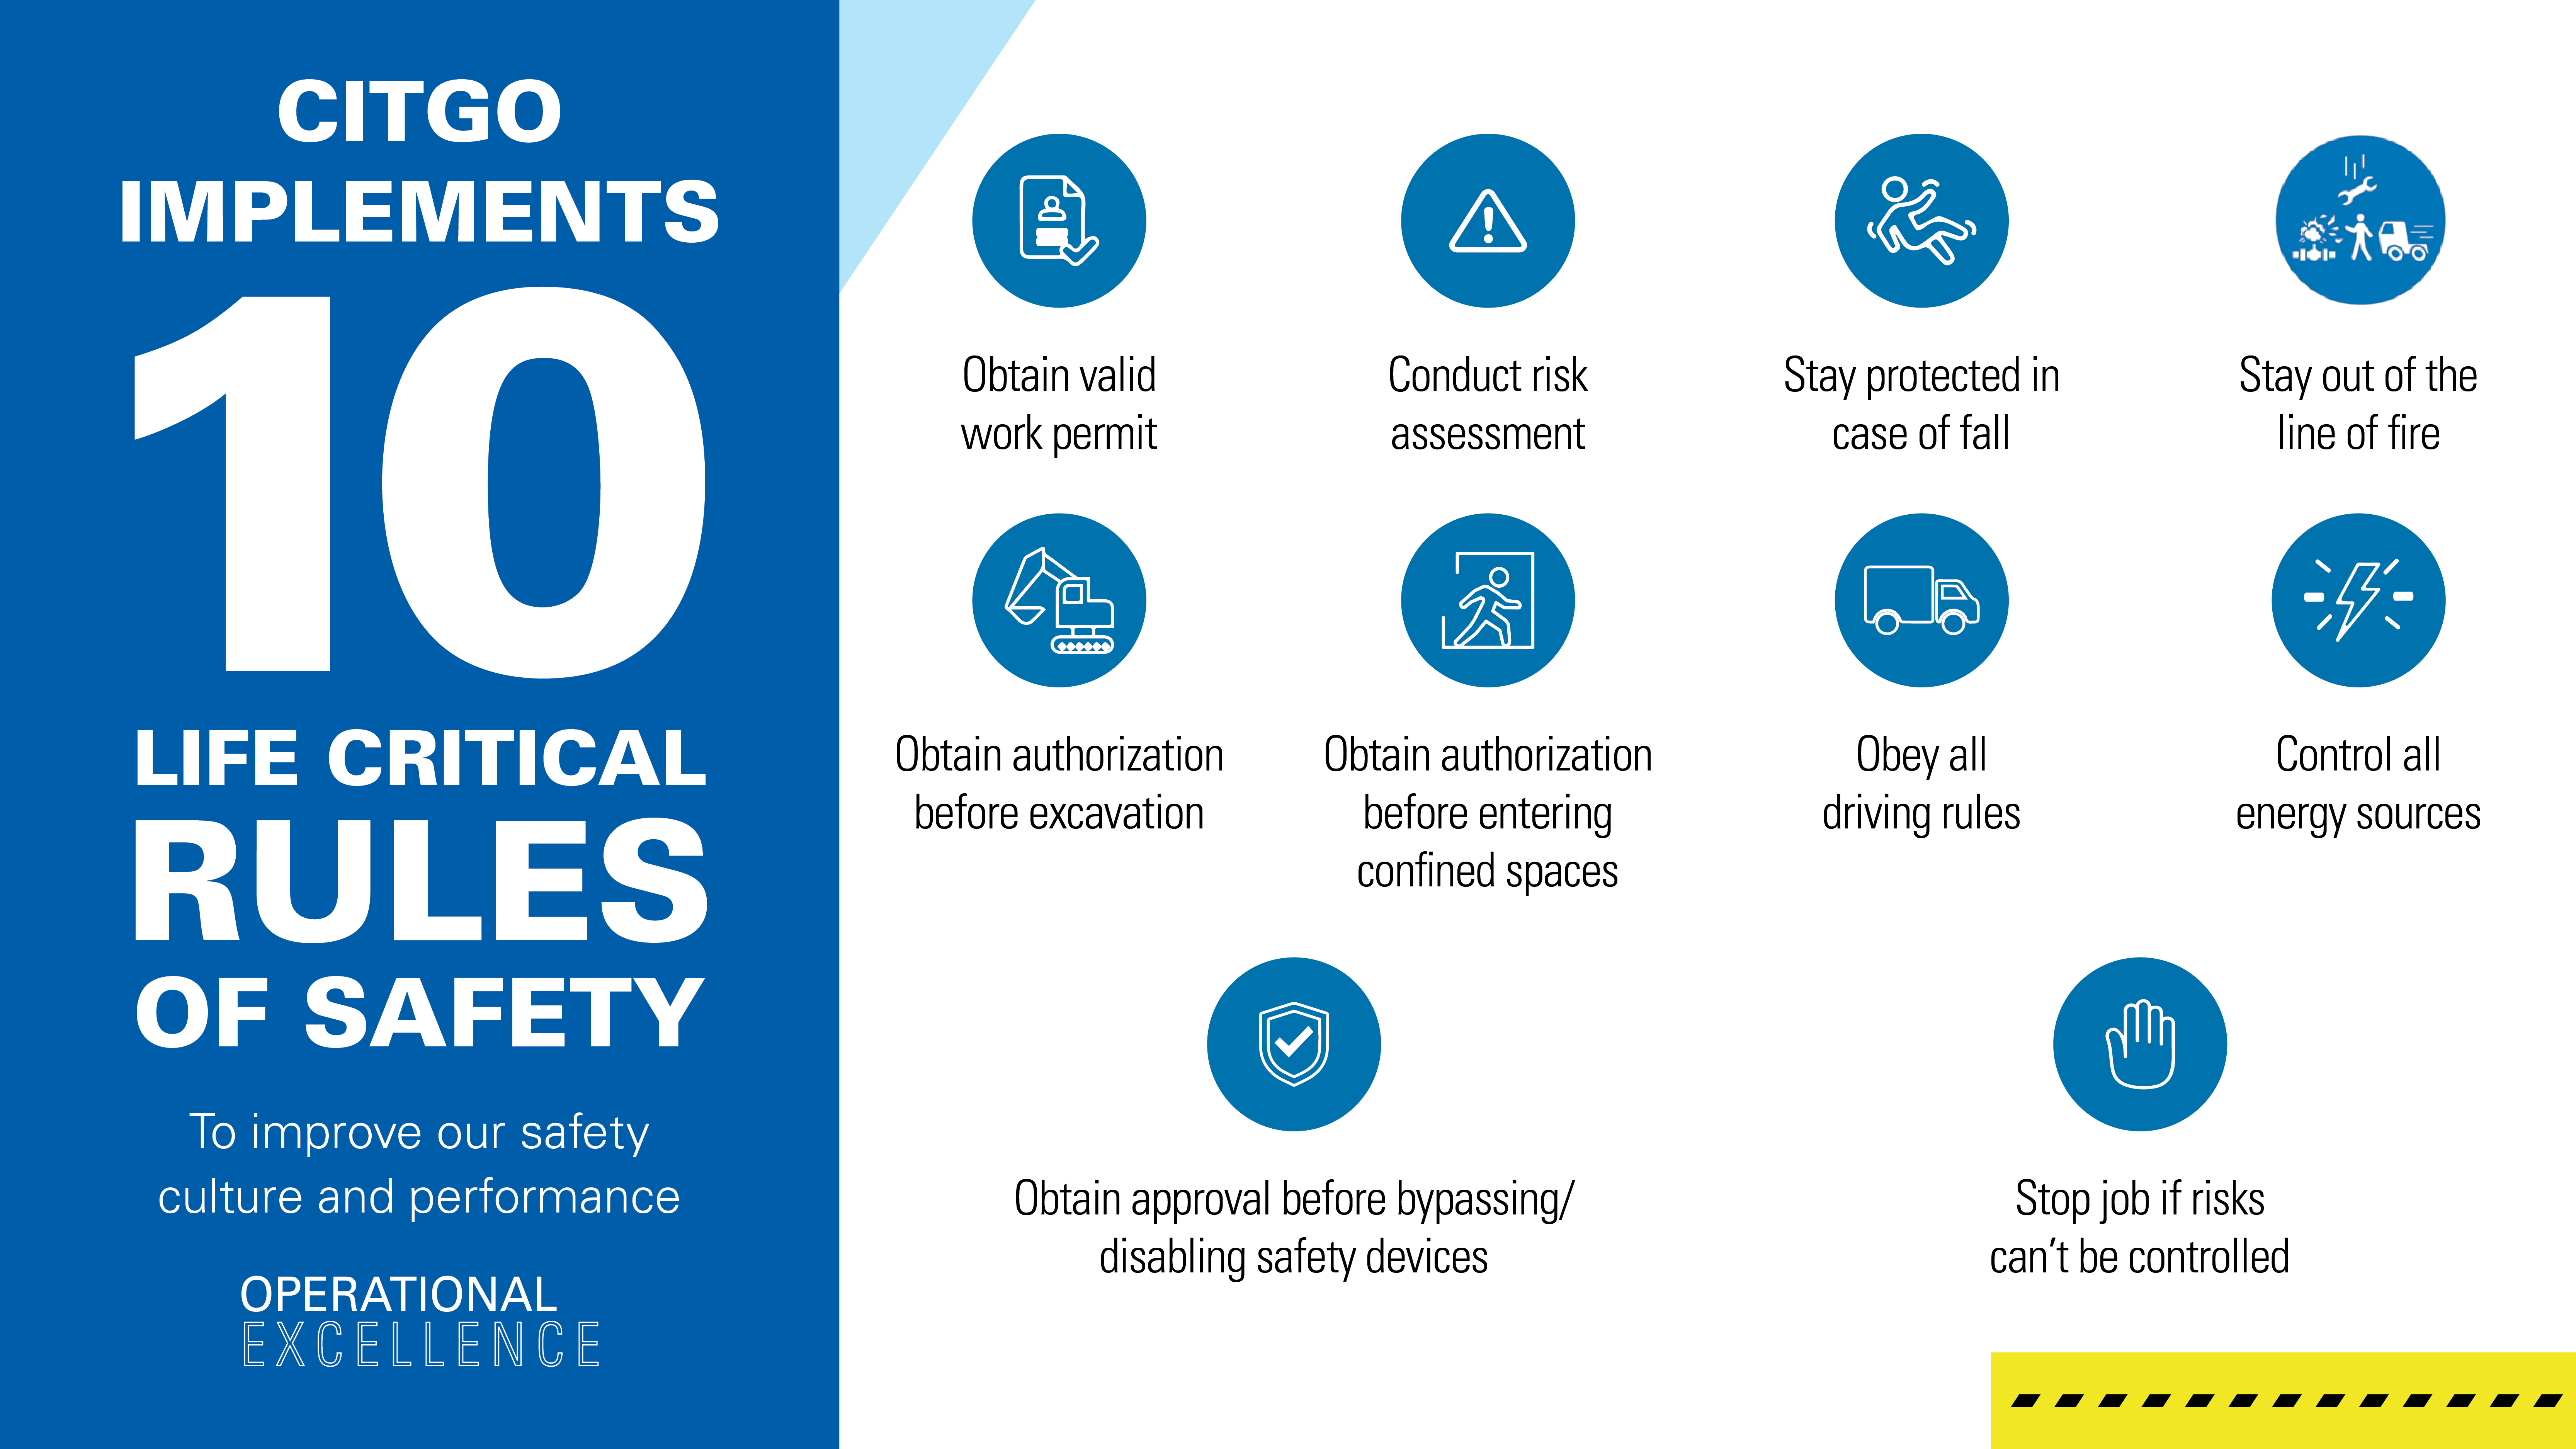 CITGO implements 10 life critical rules of safety